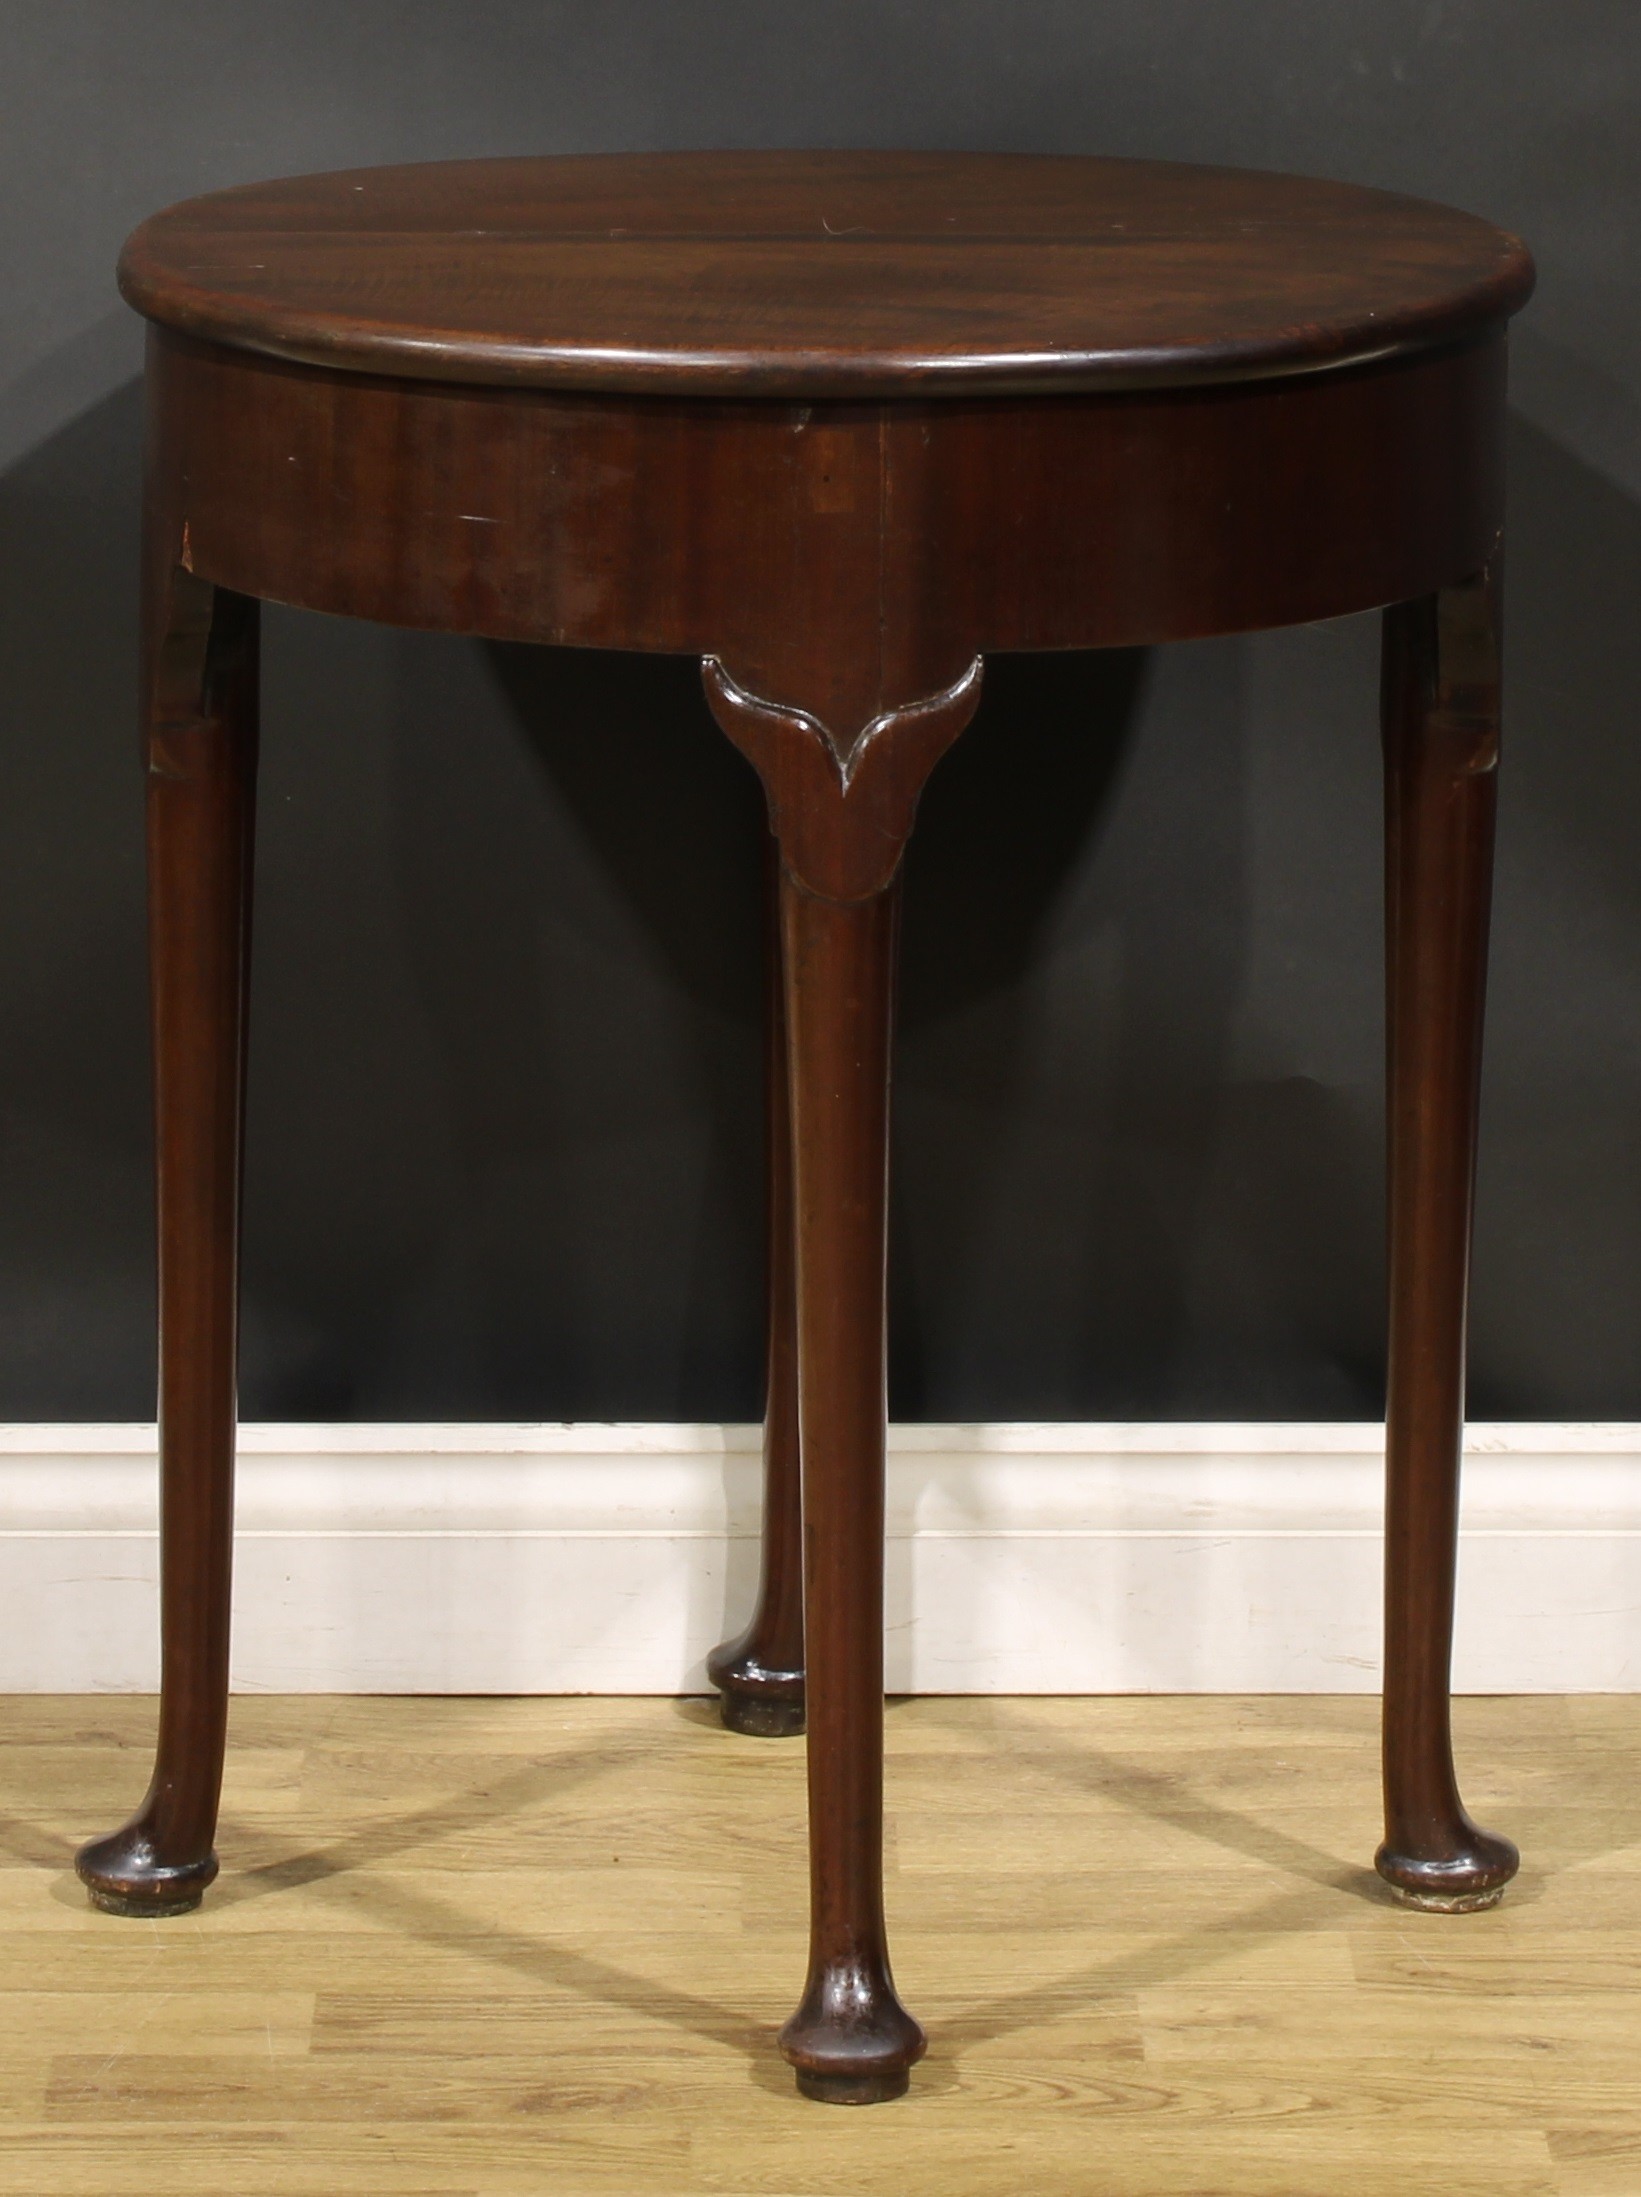 A 19th century mahogany gateleg lamp or occasional table, fall leaf, straightened cabriole legs, pad - Image 3 of 6